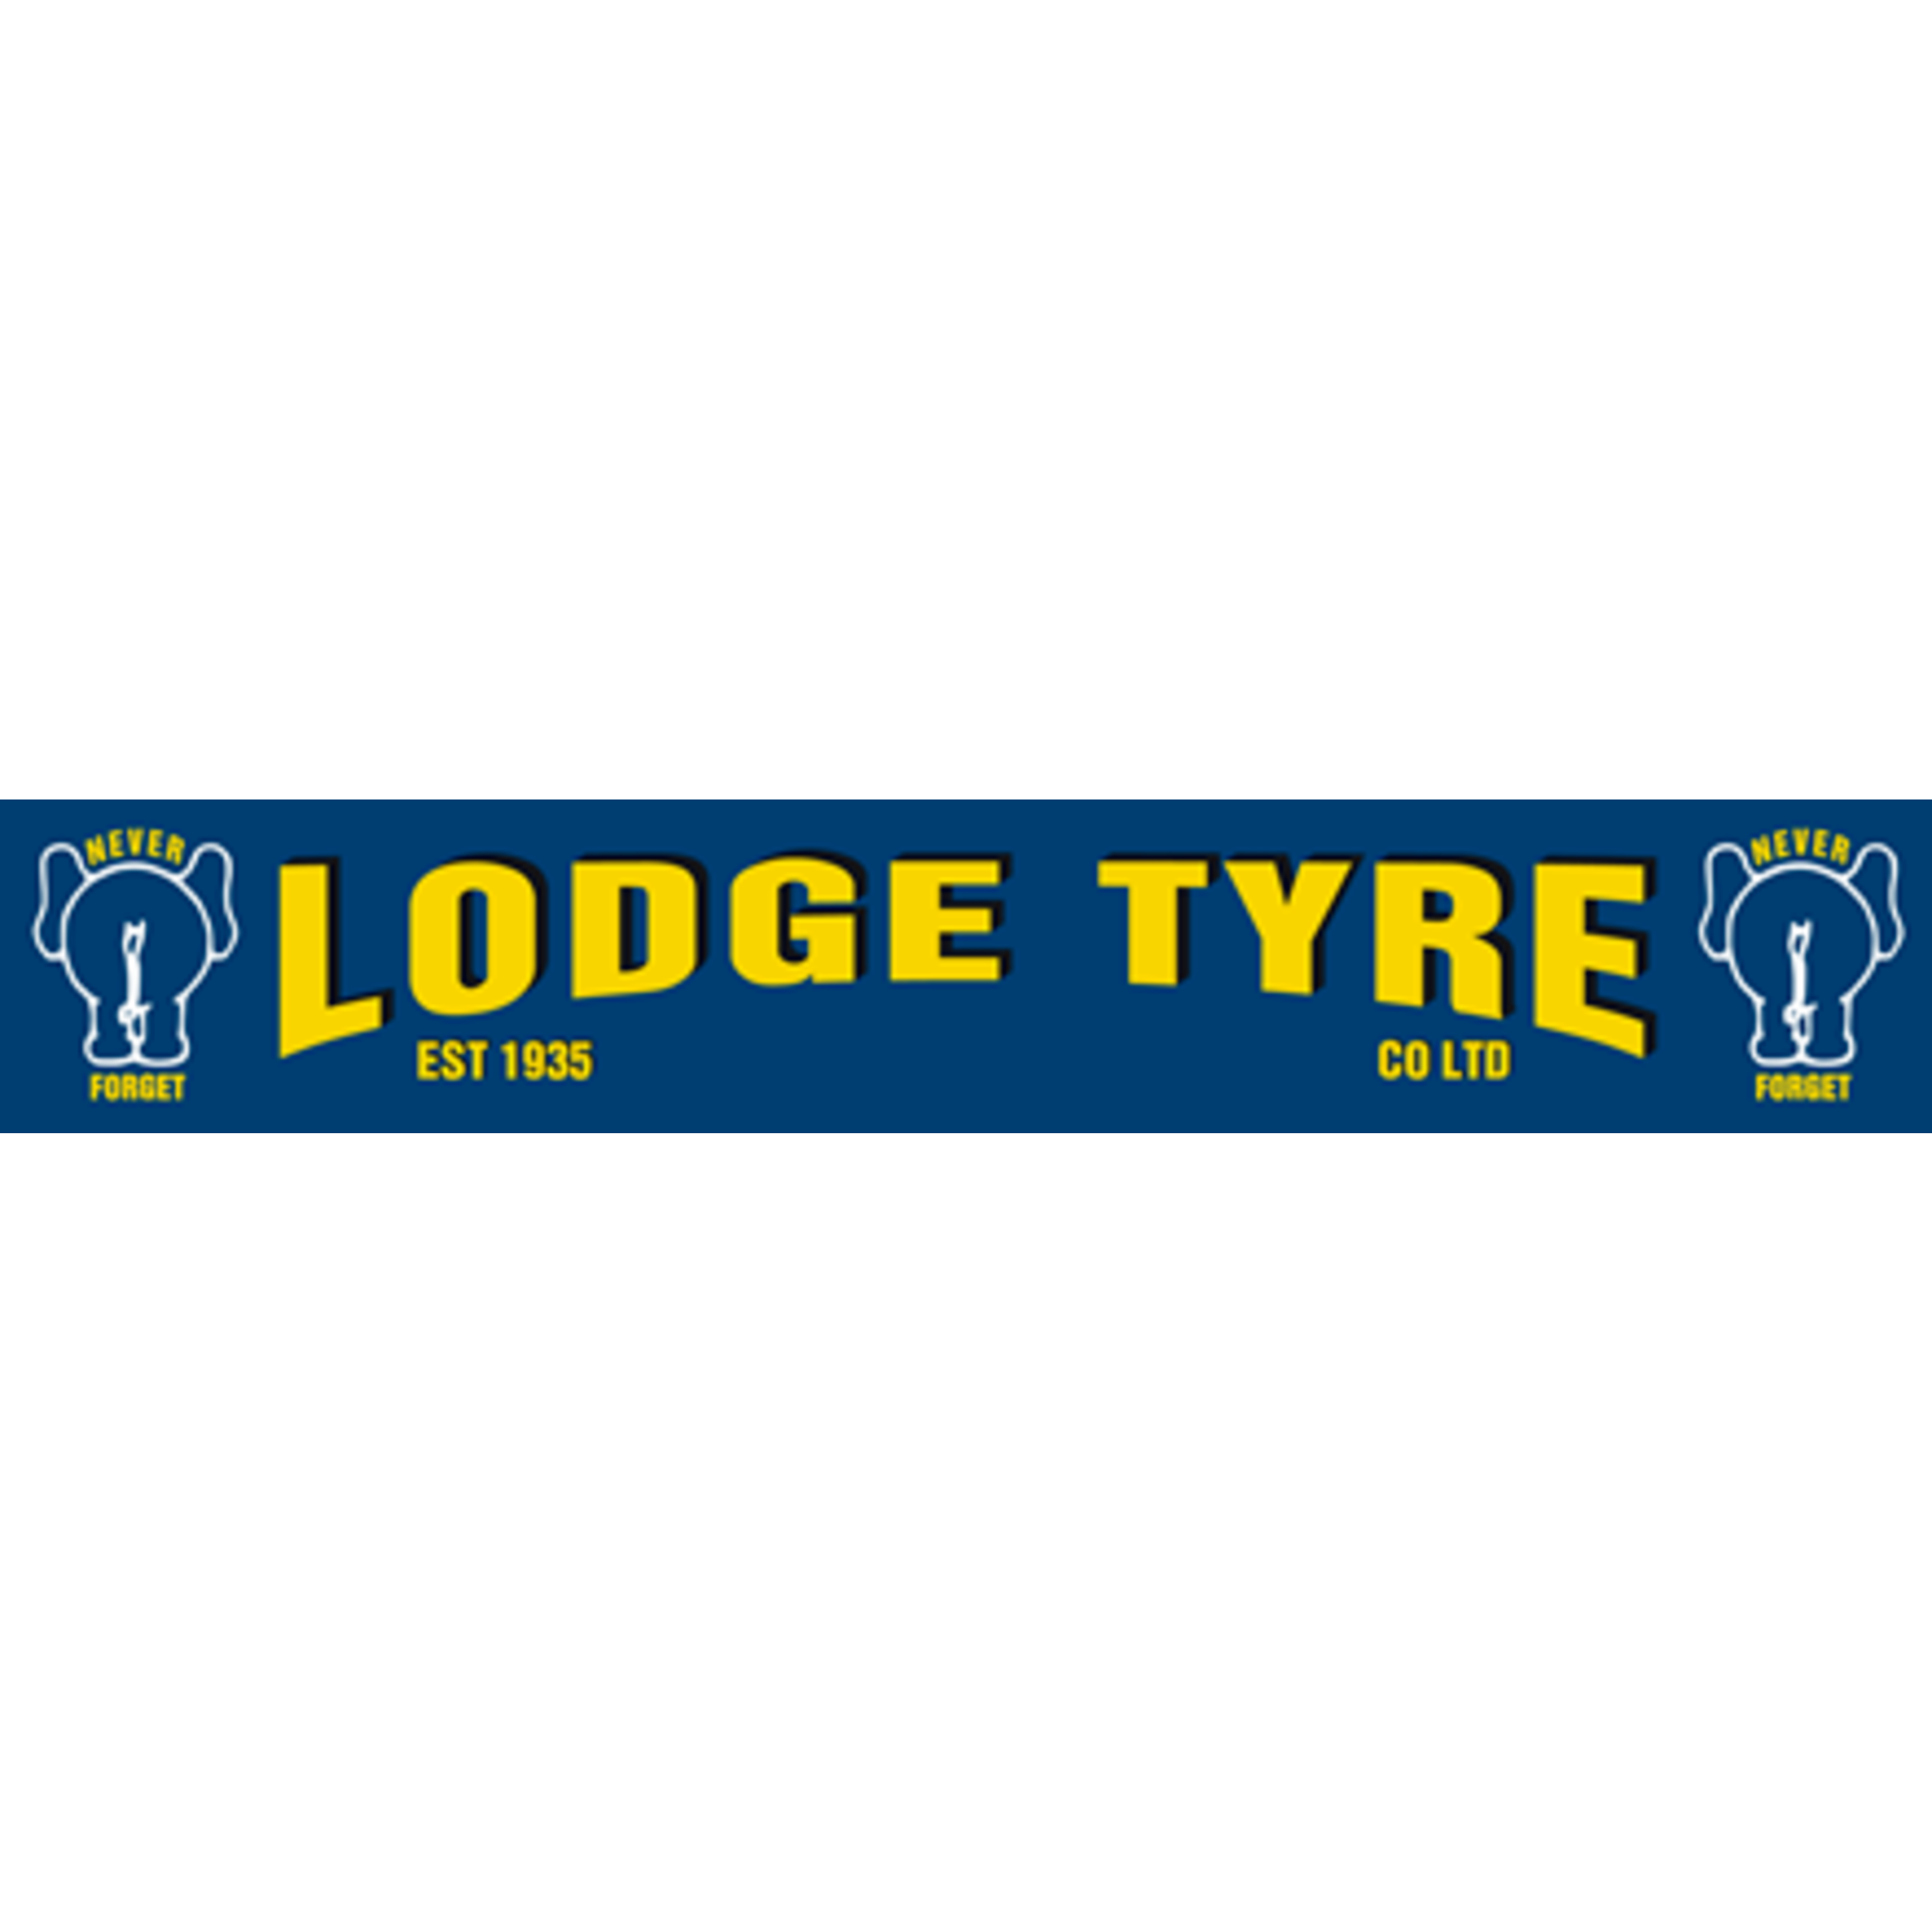 Lodge Tyre Company Limited - Liverpool - Liverpool, Merseyside L33 7YQ - 01515 472301 | ShowMeLocal.com